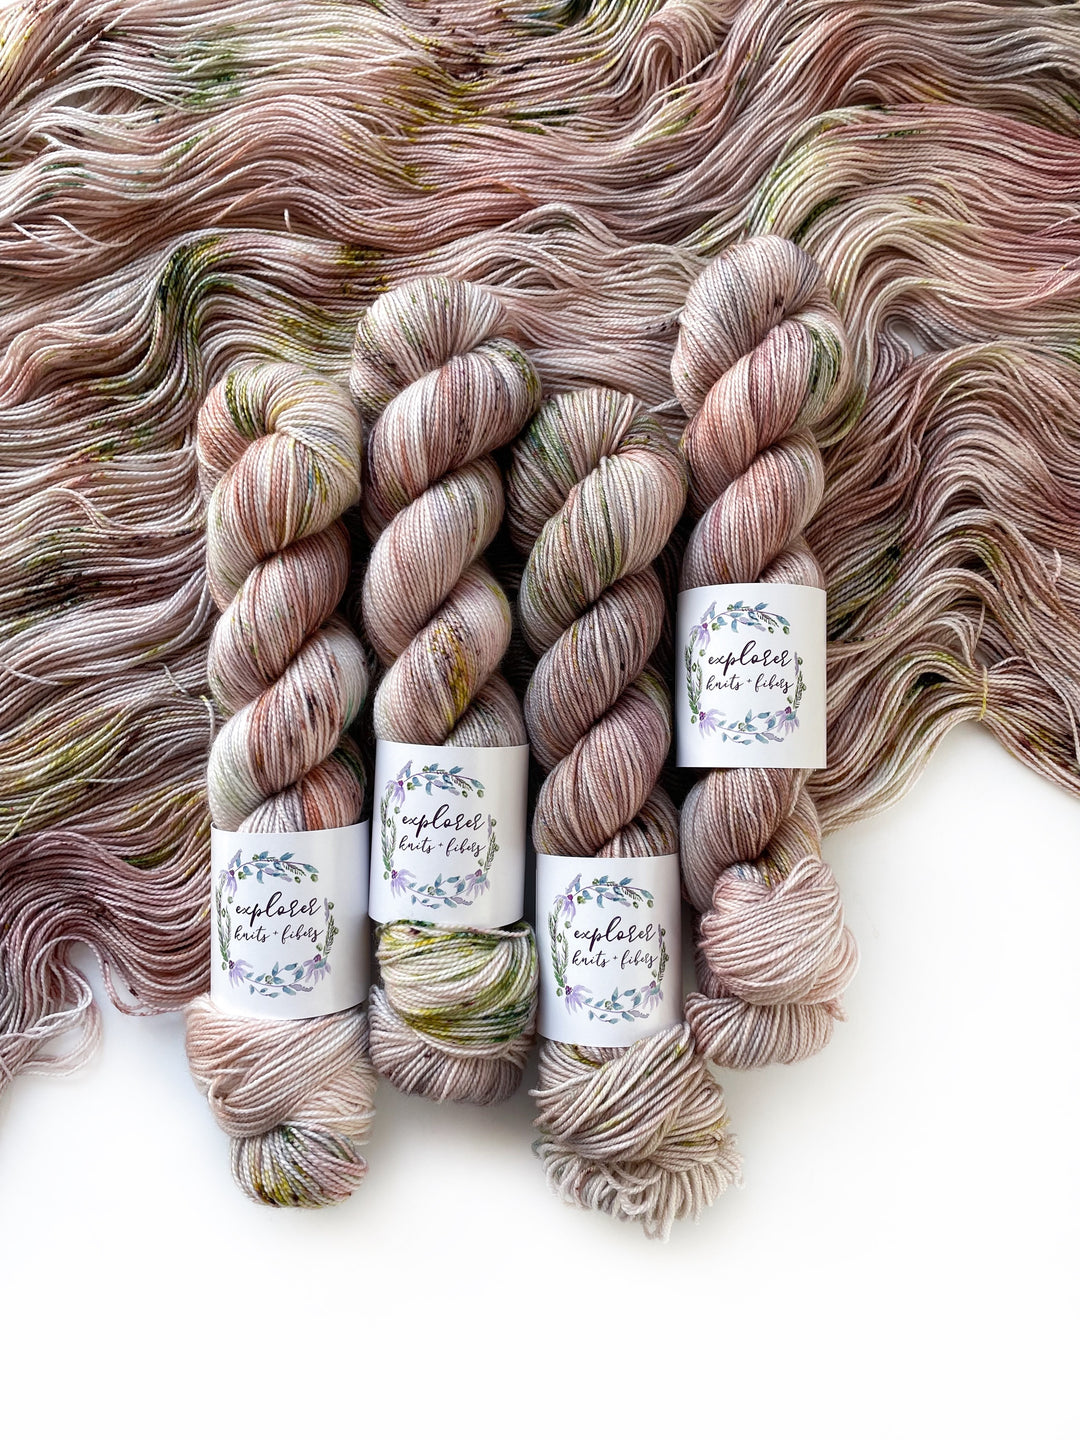 Knitting Our National Parks - Explorer Knits + Fibers